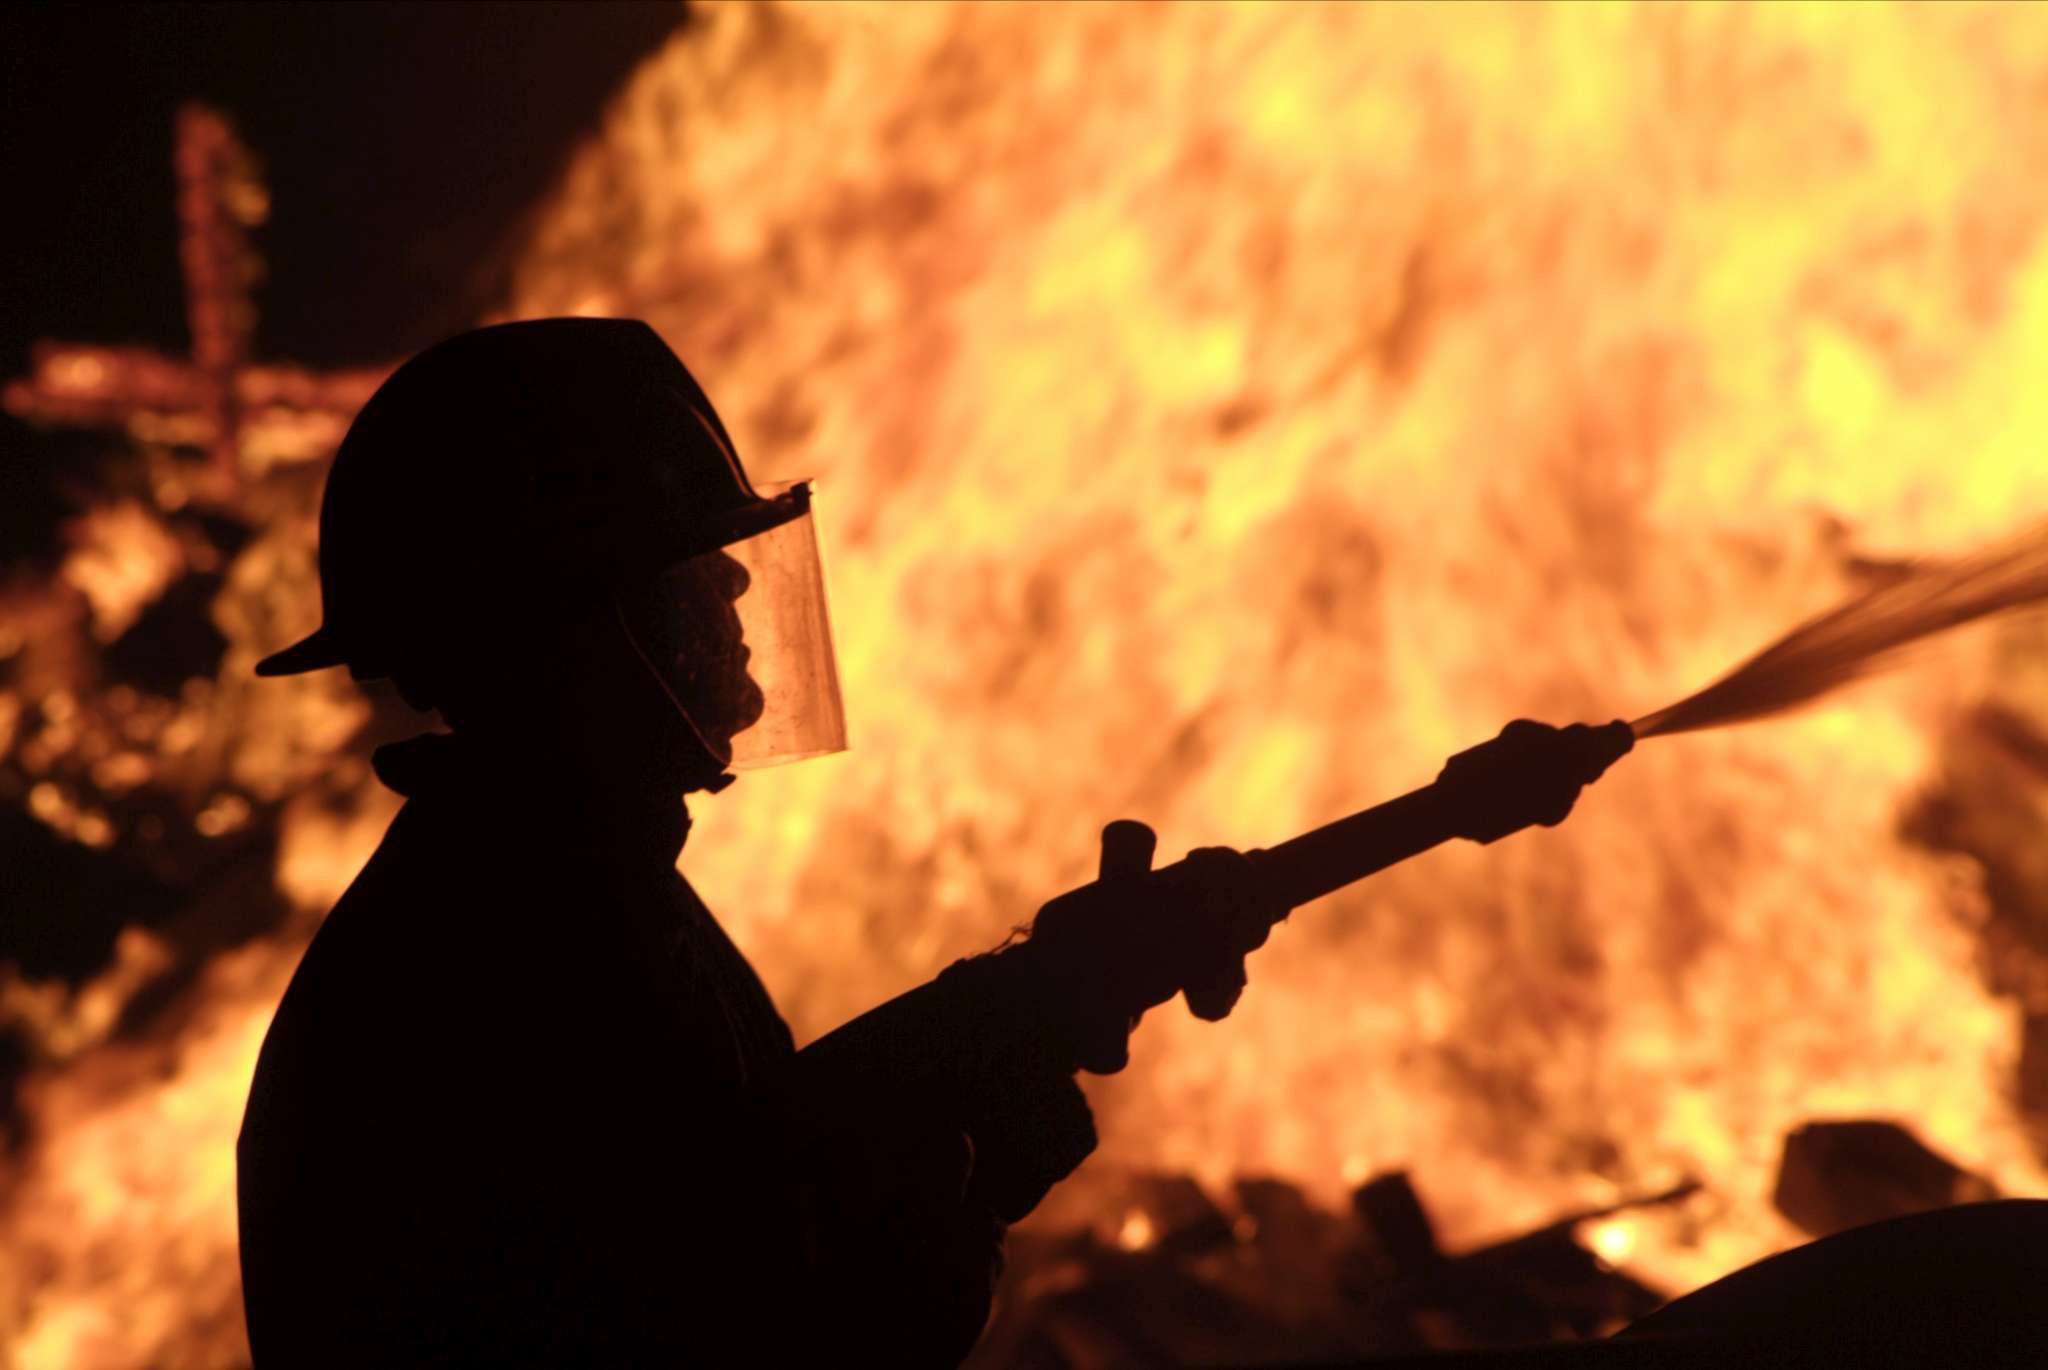 A silhouette of a firefighter spraying water onto a large blaze.